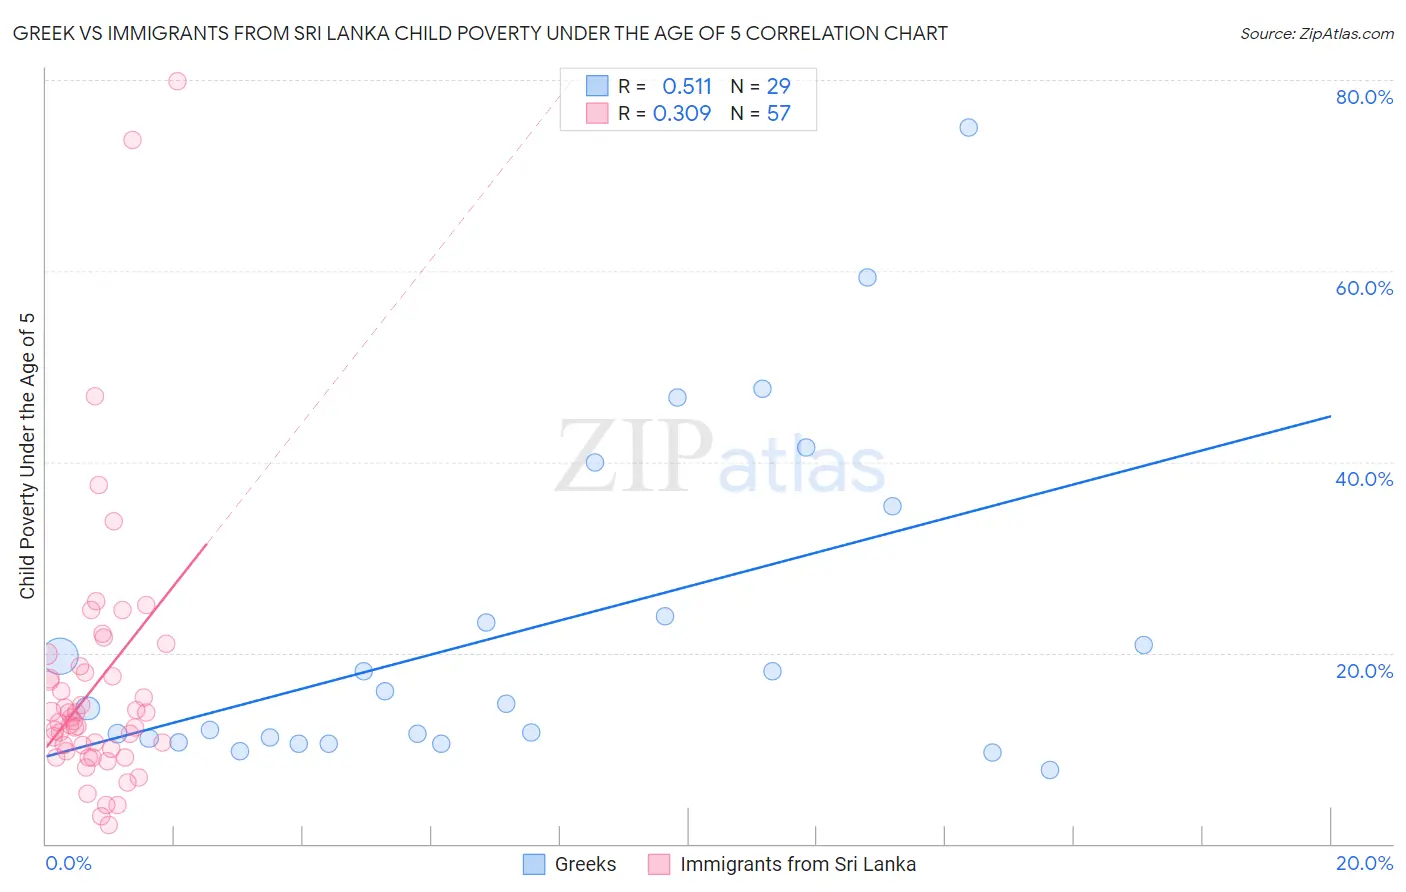 Greek vs Immigrants from Sri Lanka Child Poverty Under the Age of 5